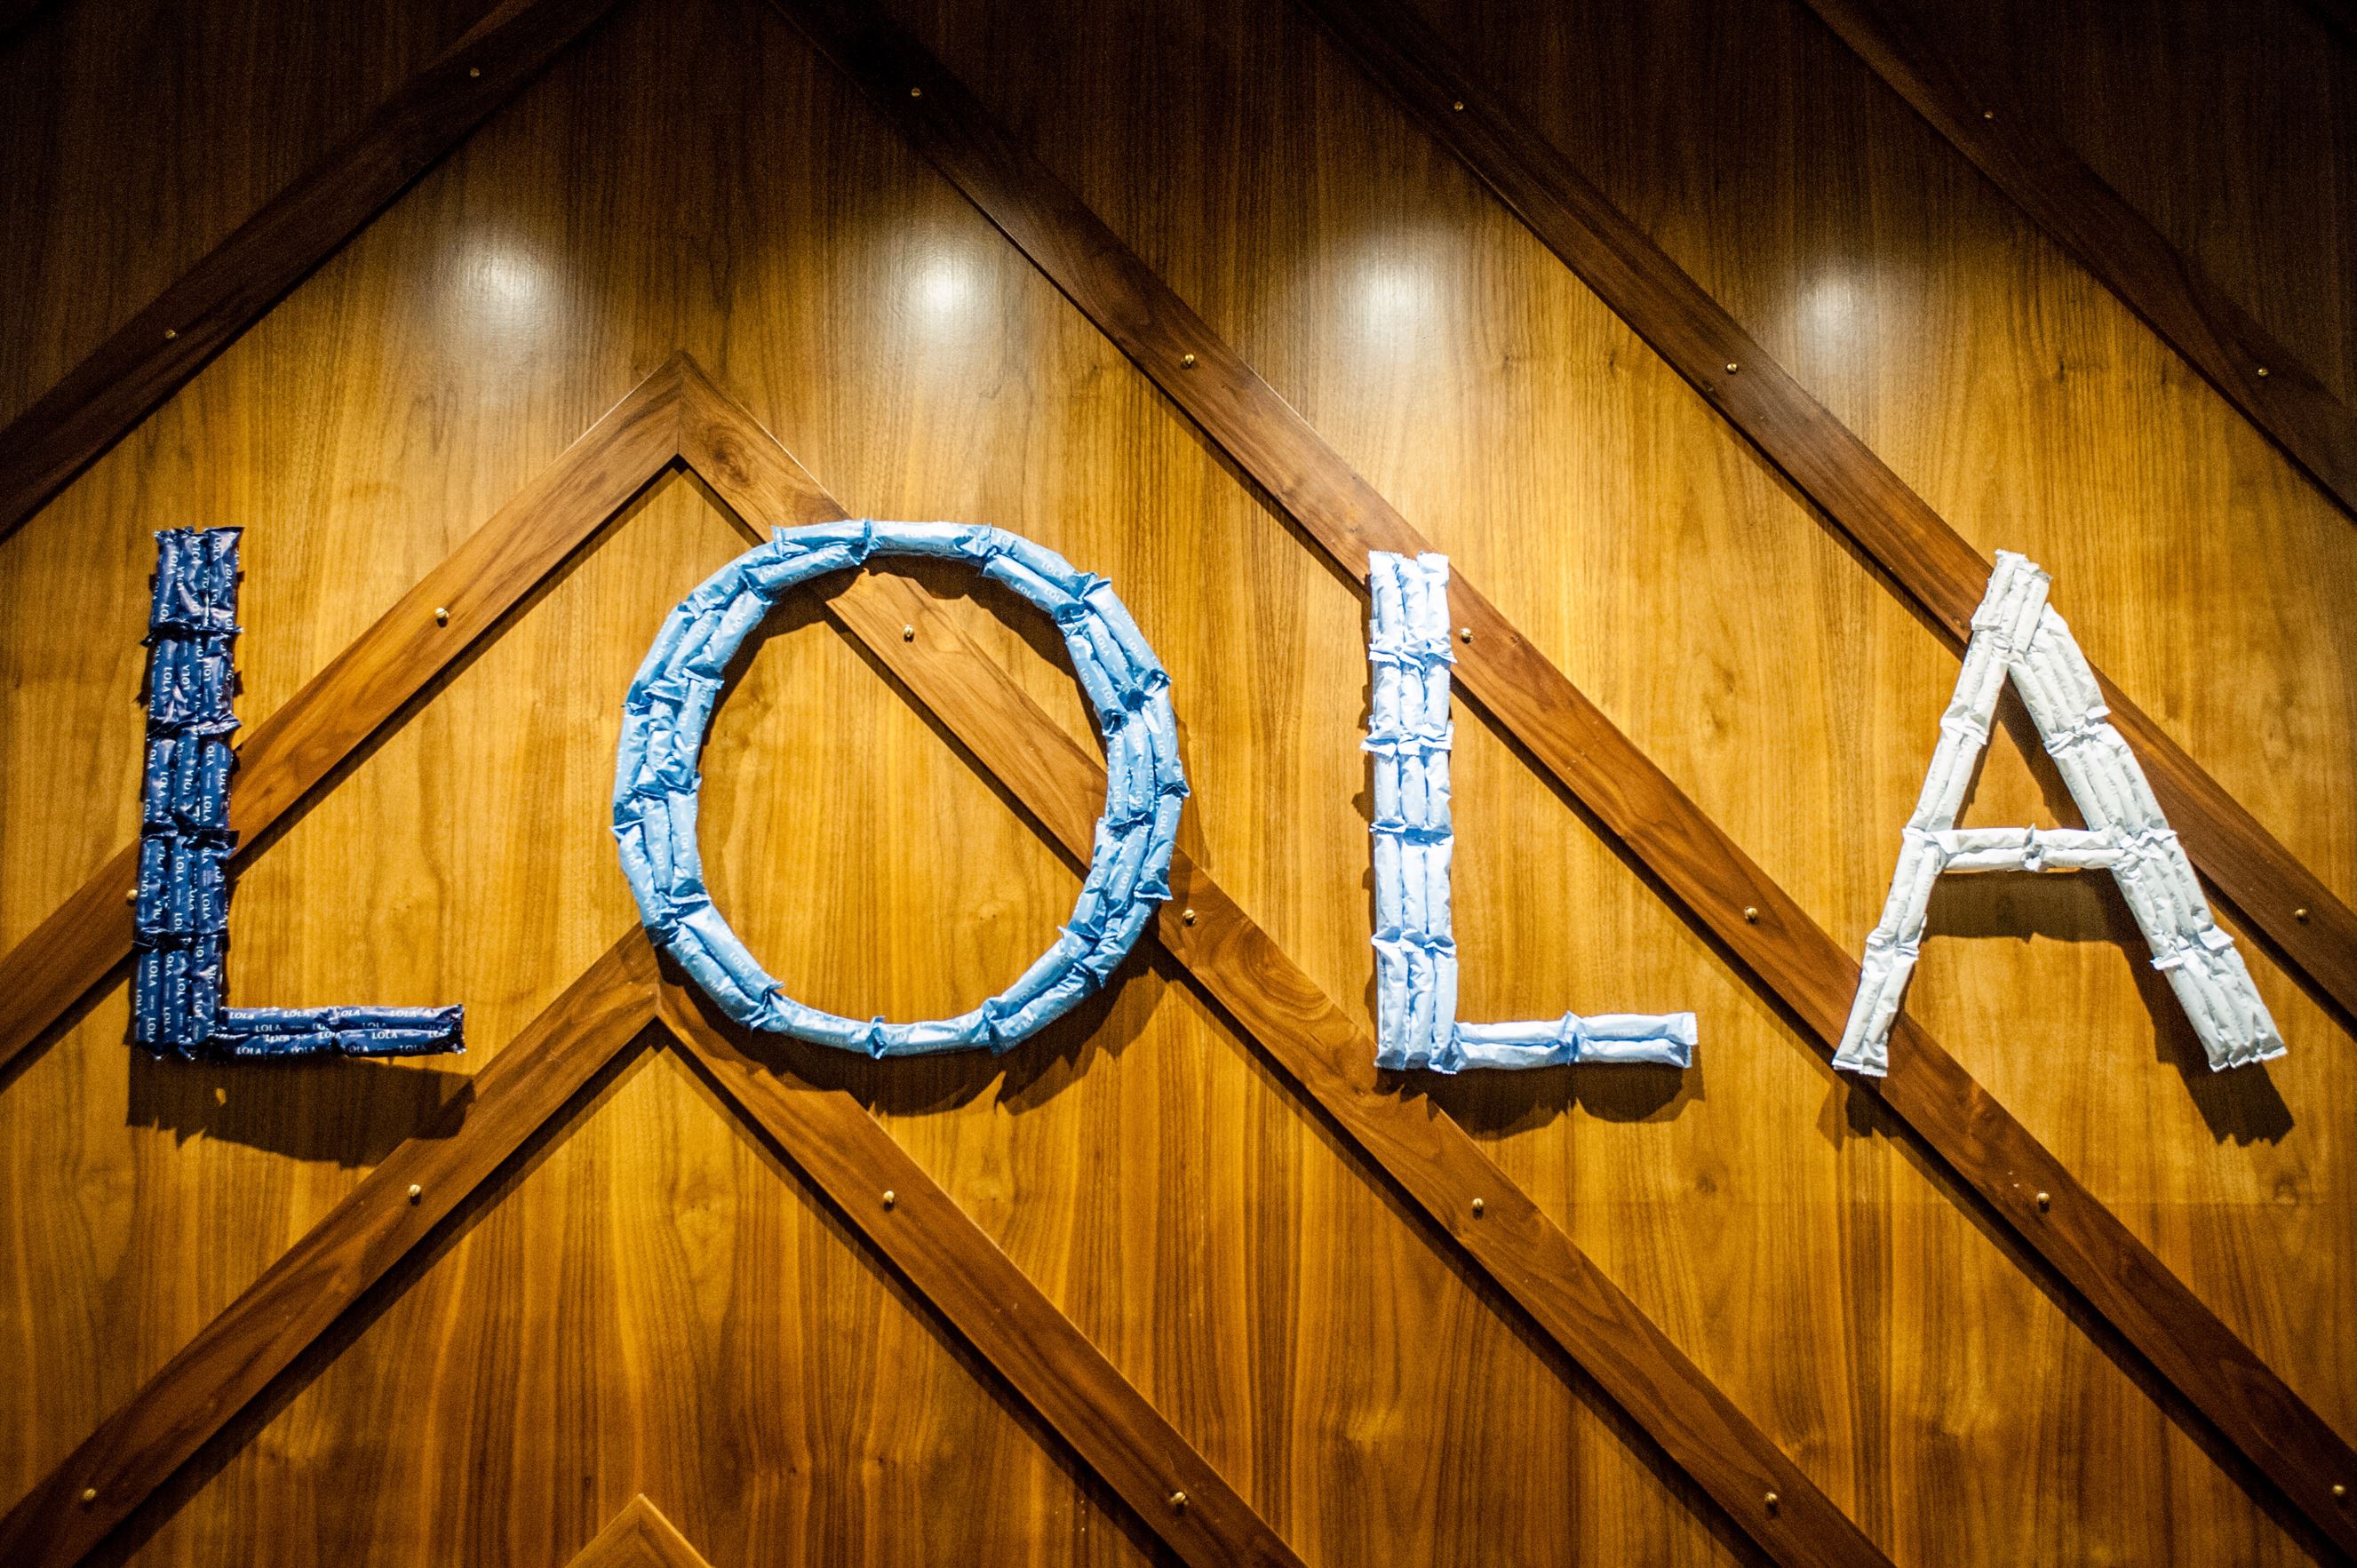 Lola Brand Activation Event Gallery at Blender, Private event venue New York